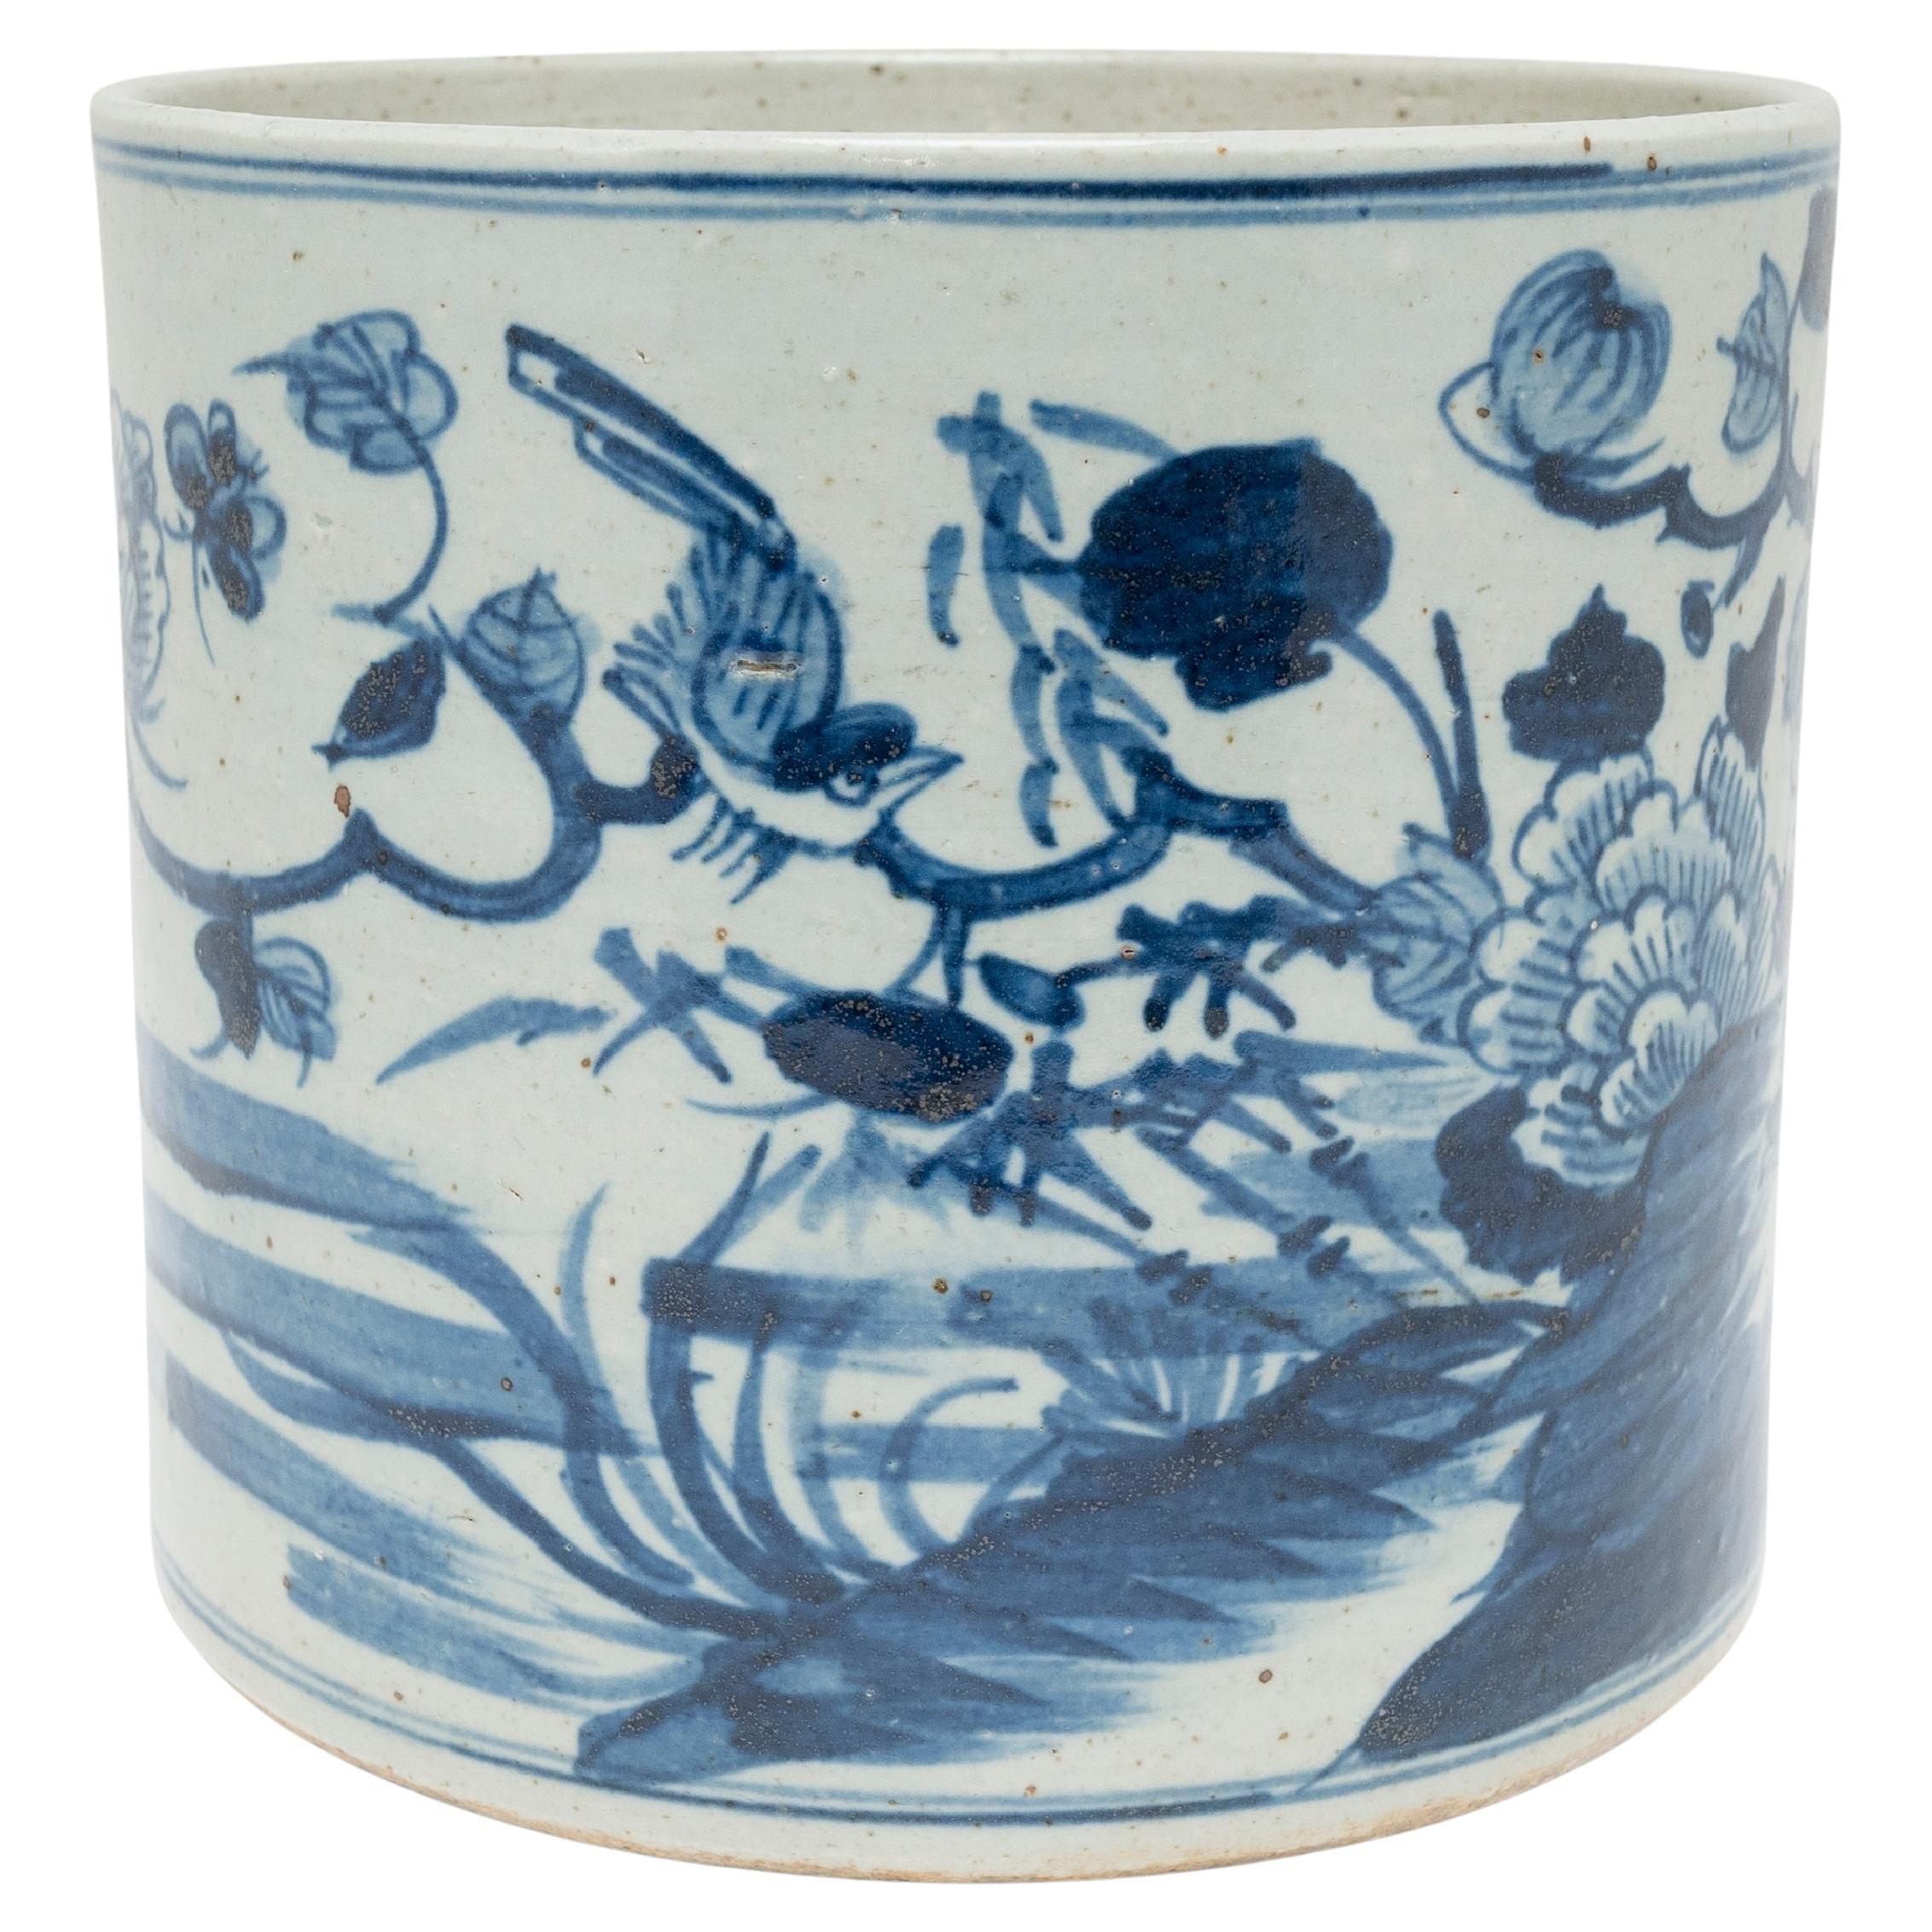 Blue and White Ceramic Chinese Pot with Lid For Sale at 1stDibs